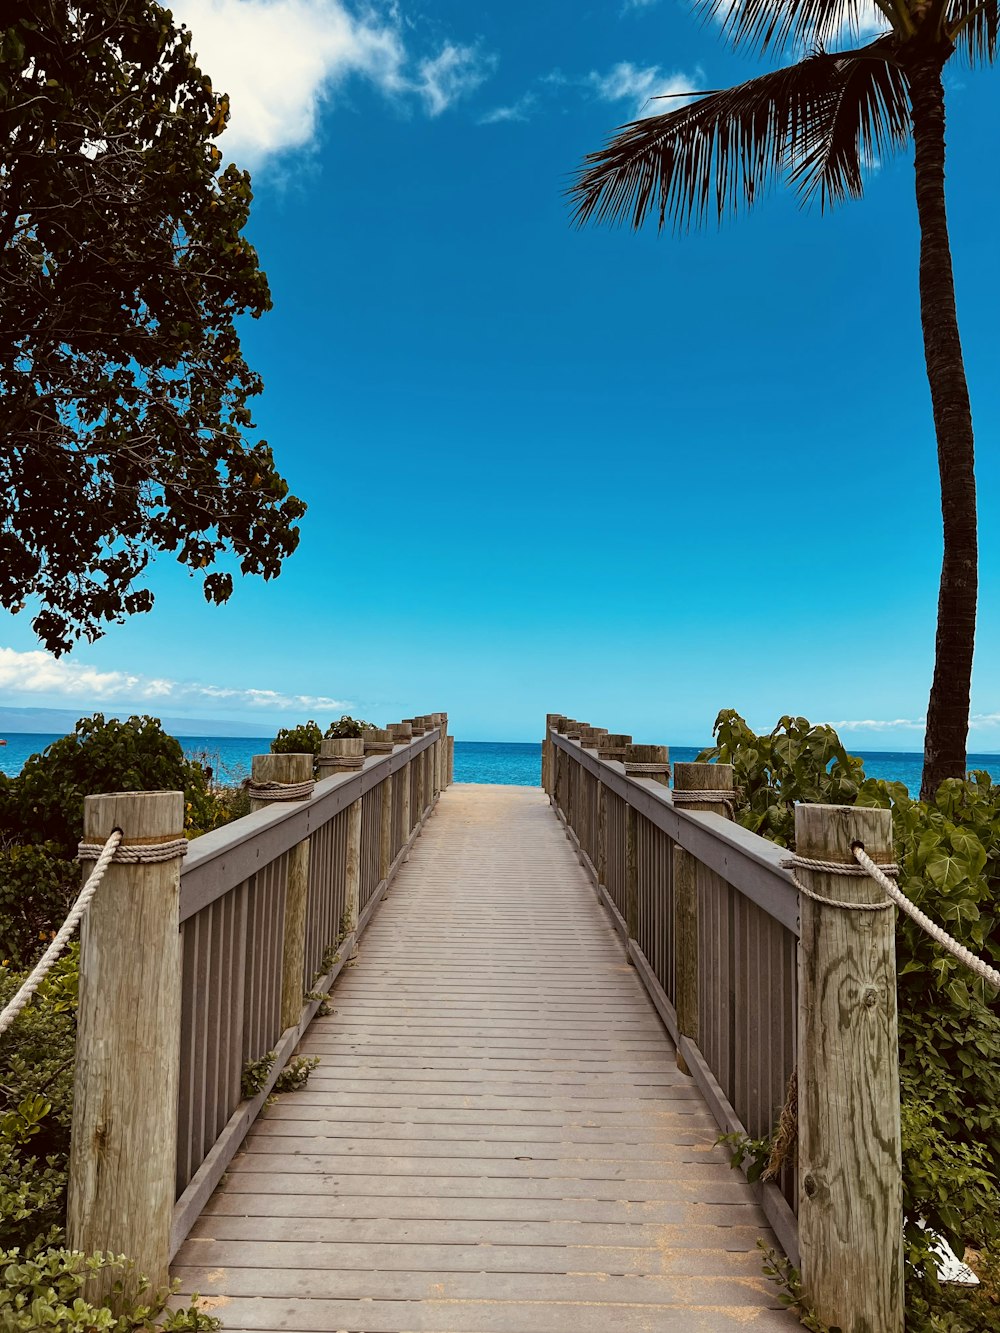 a walkway leading to the ocean with a palm tree in the foreground